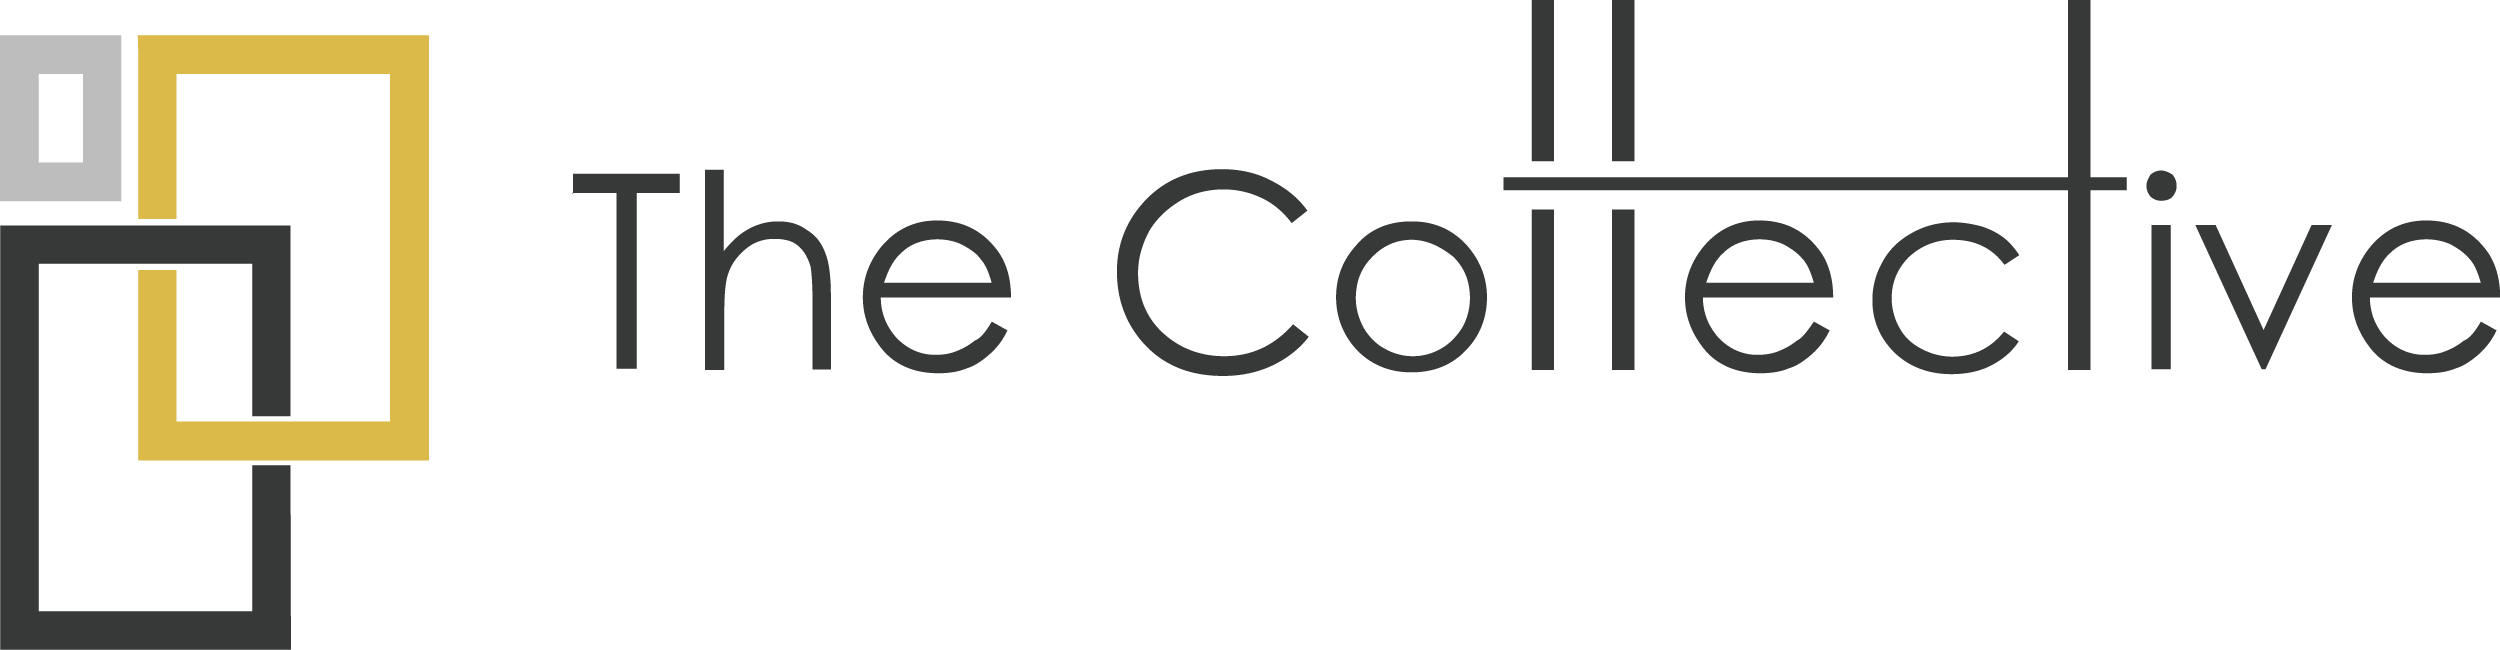 collective-dc_logo-01.png